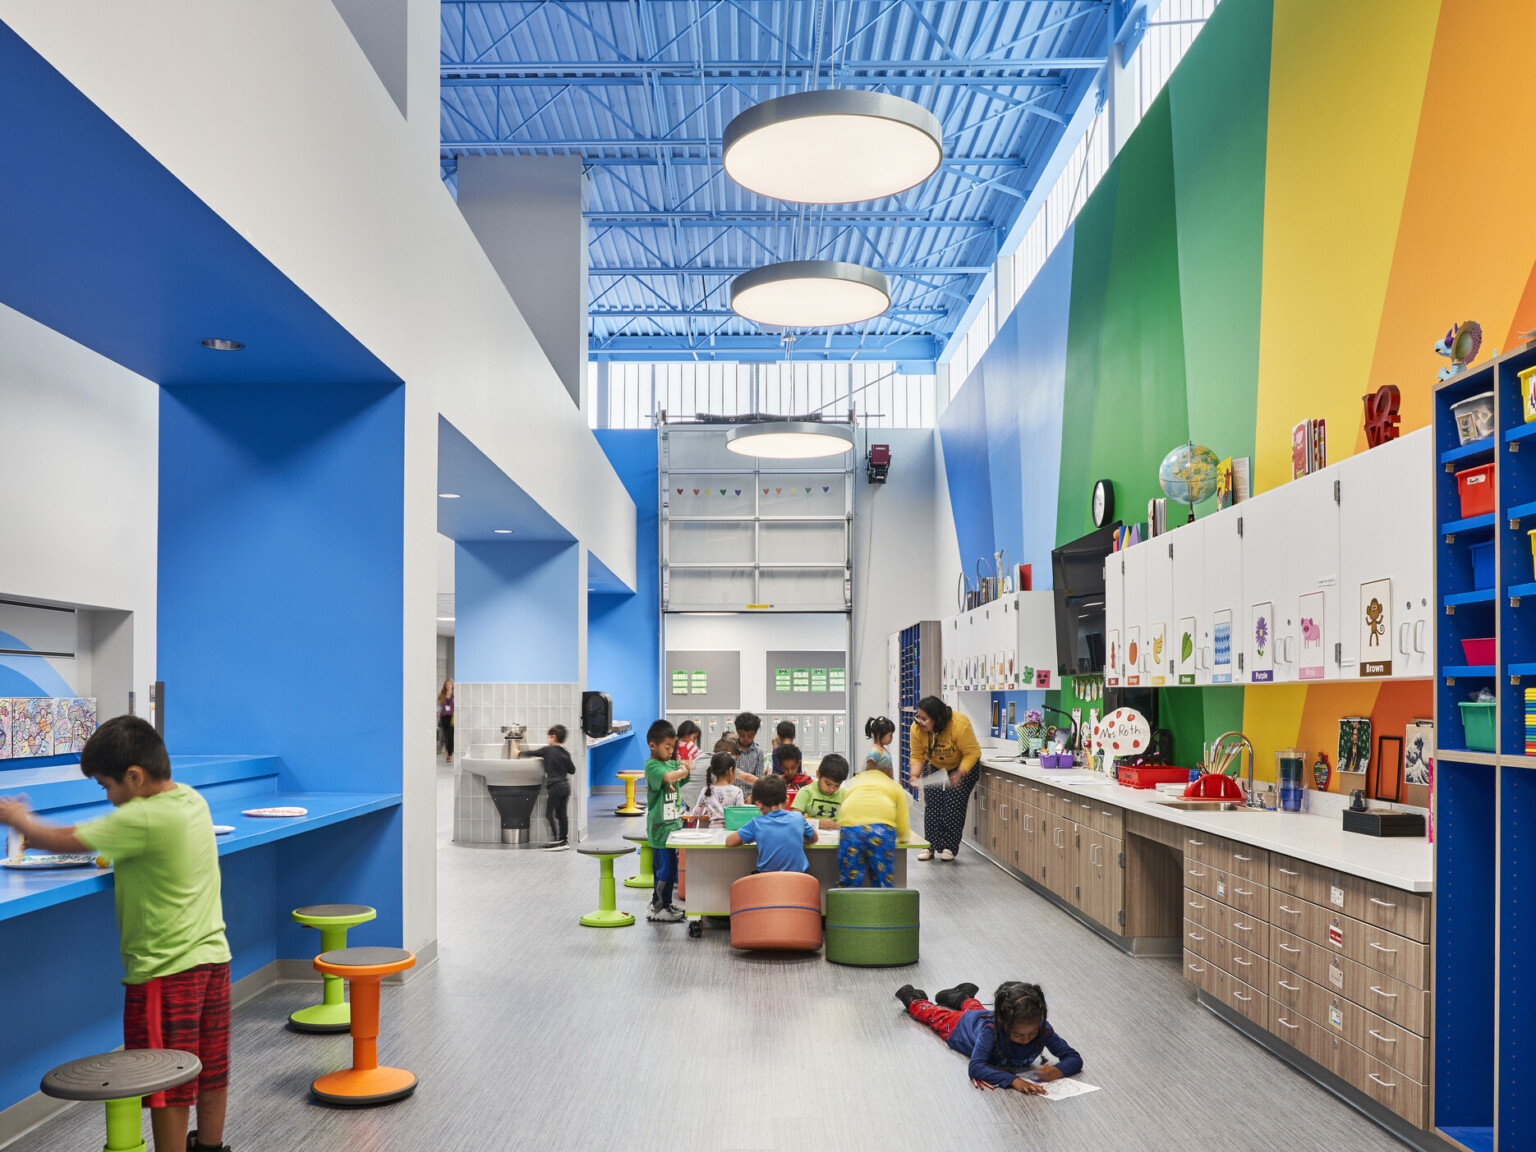 Classroom interior open-concept classroom with vaulted ceilings, custom lighting fixtures, natural daylight, brightly colored walls, children in various seating arrangements